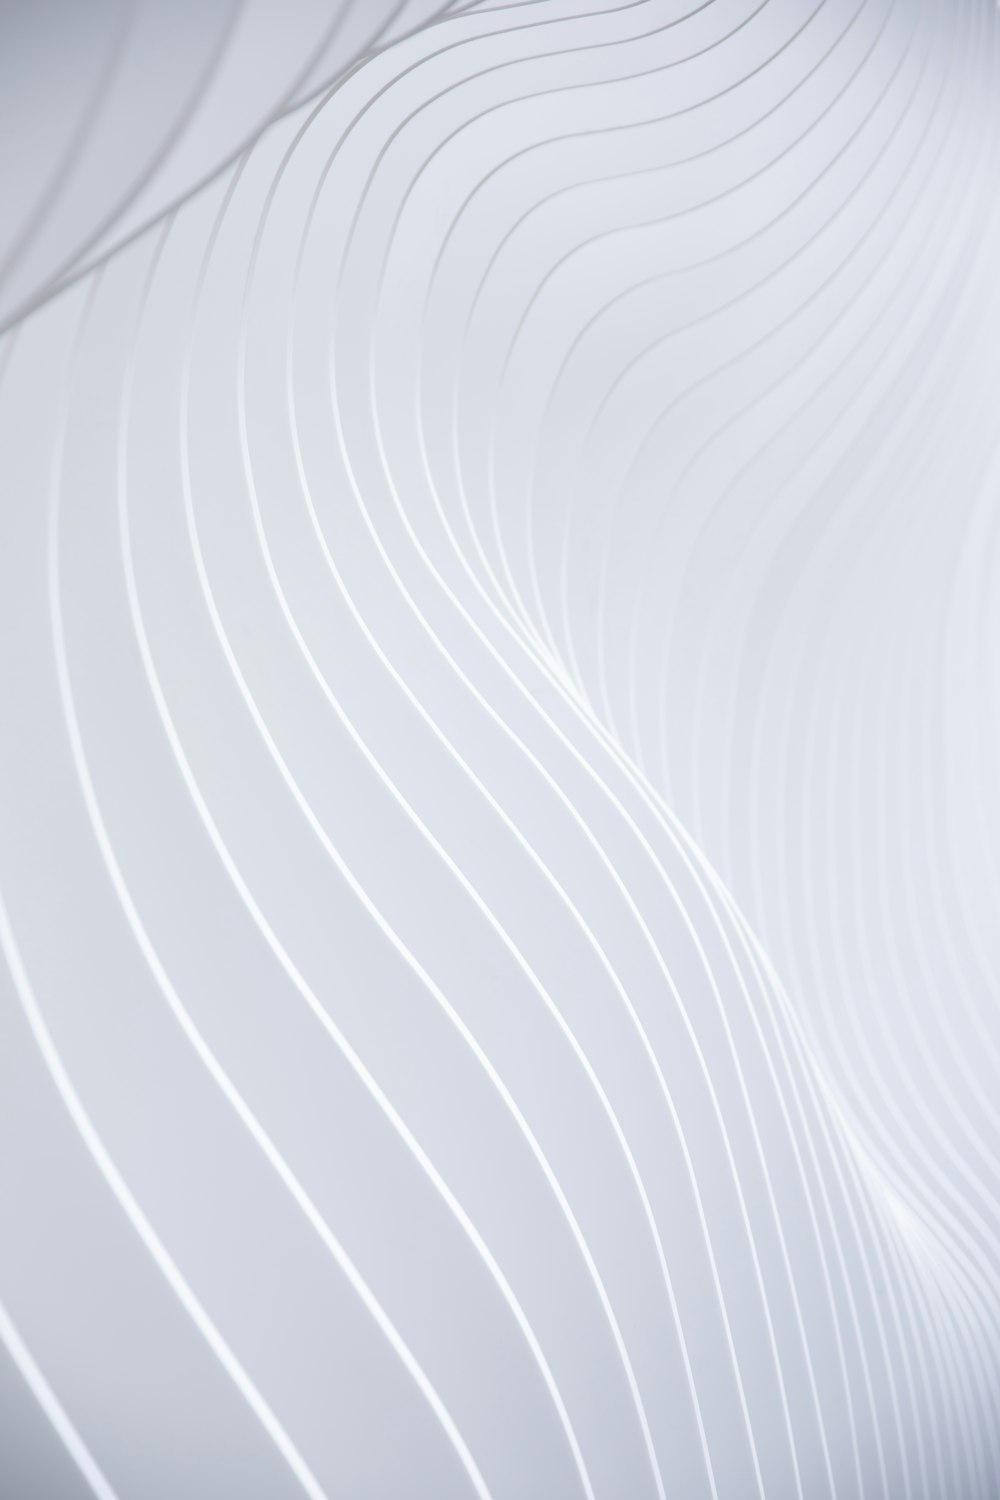 a close up of a white wall with wavy lines